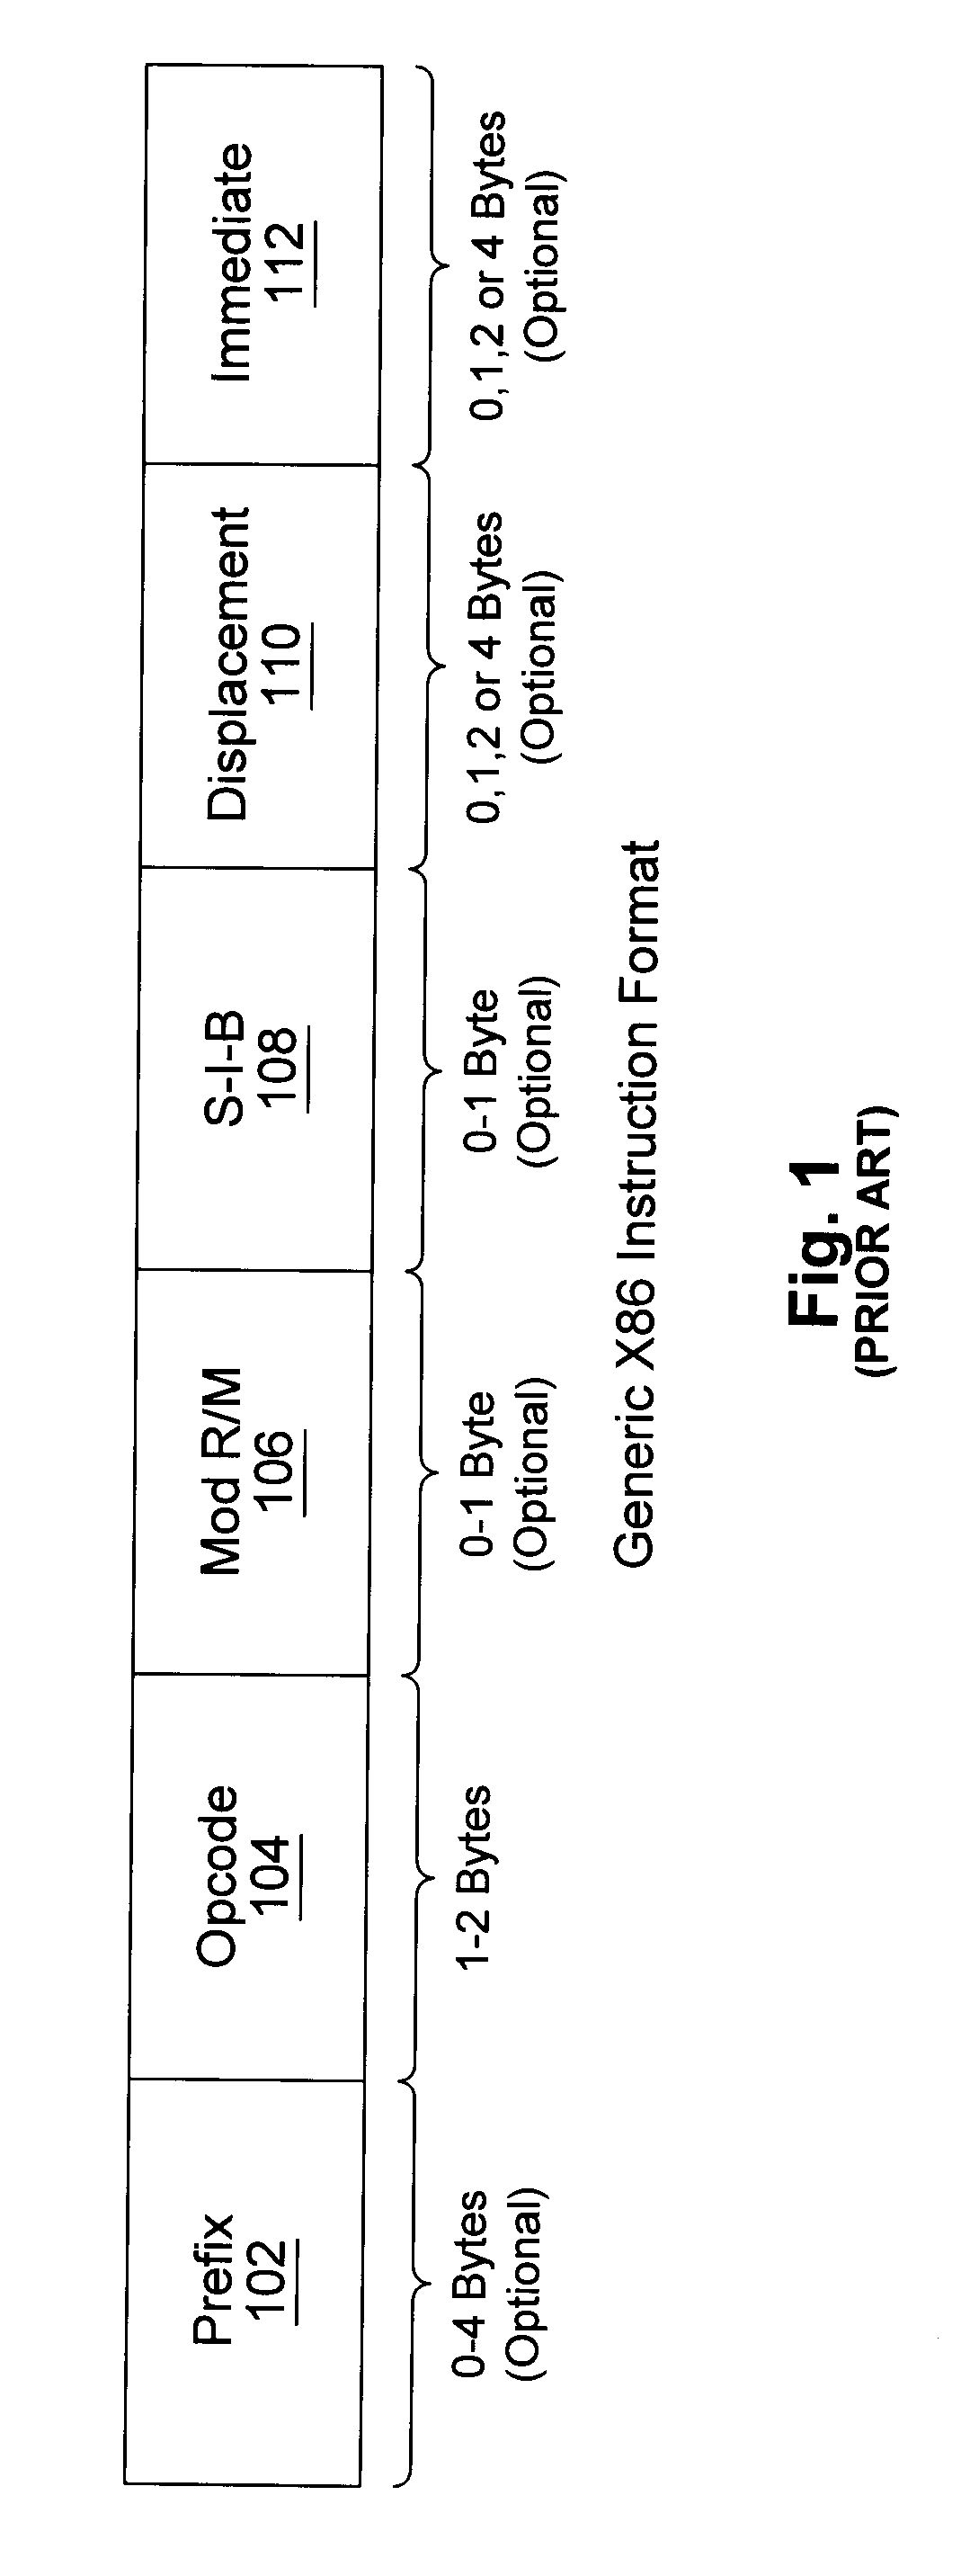 Instruction alignment unit for routing variable byte-length instructions